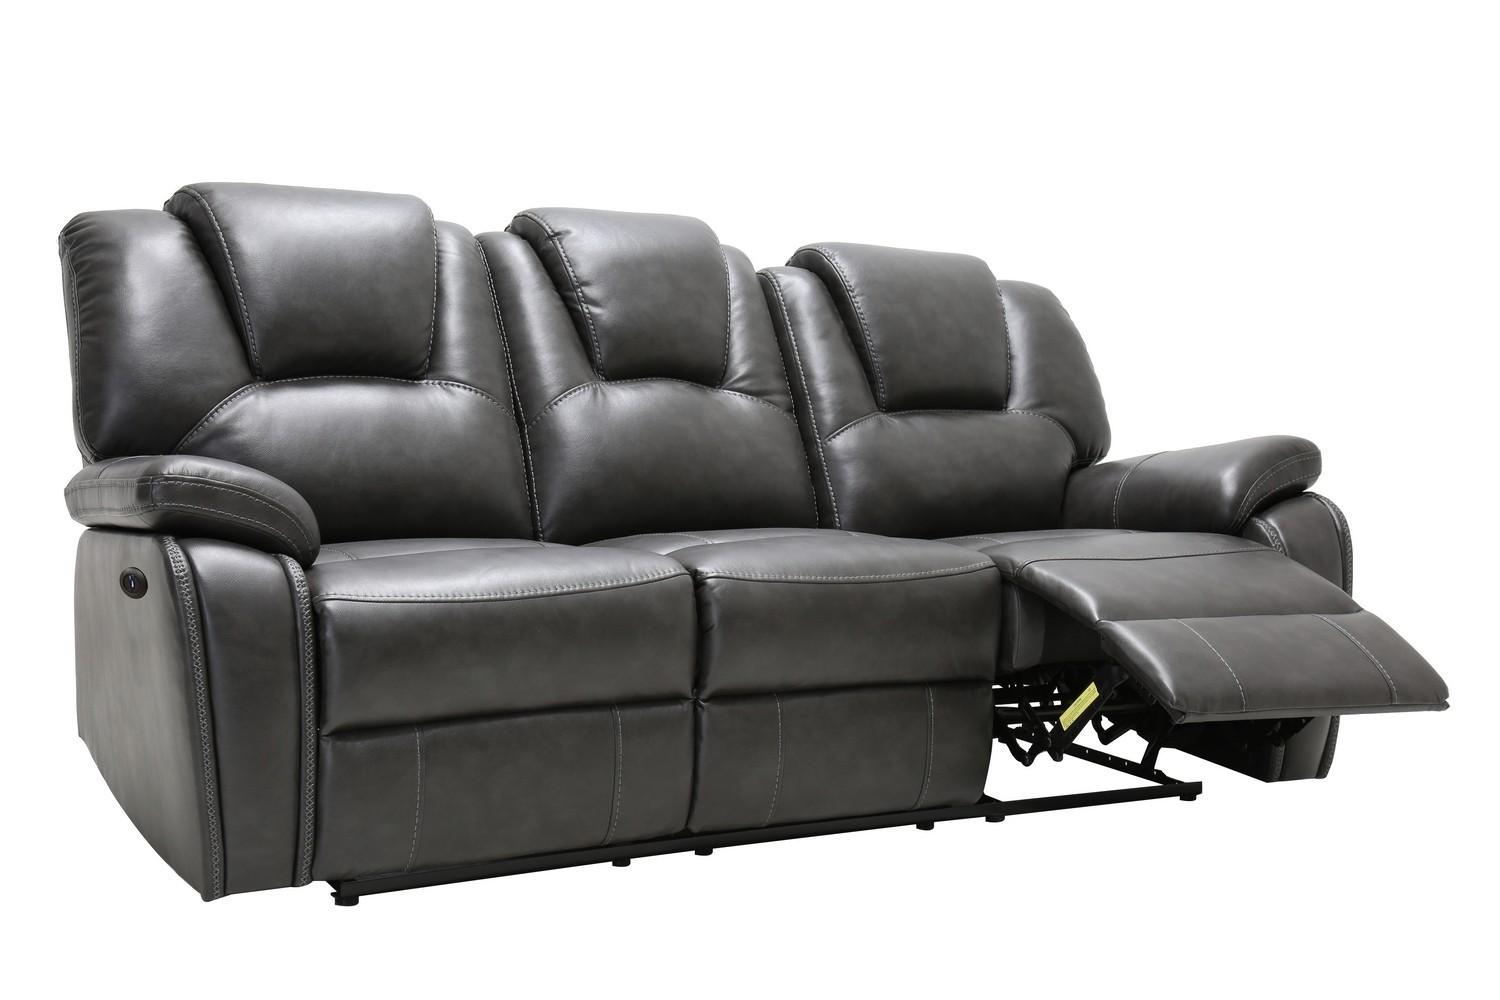 Contemporary Reclining Sofa 7993-GRAY 7993-GRAY-S in Gray Leather Air Material